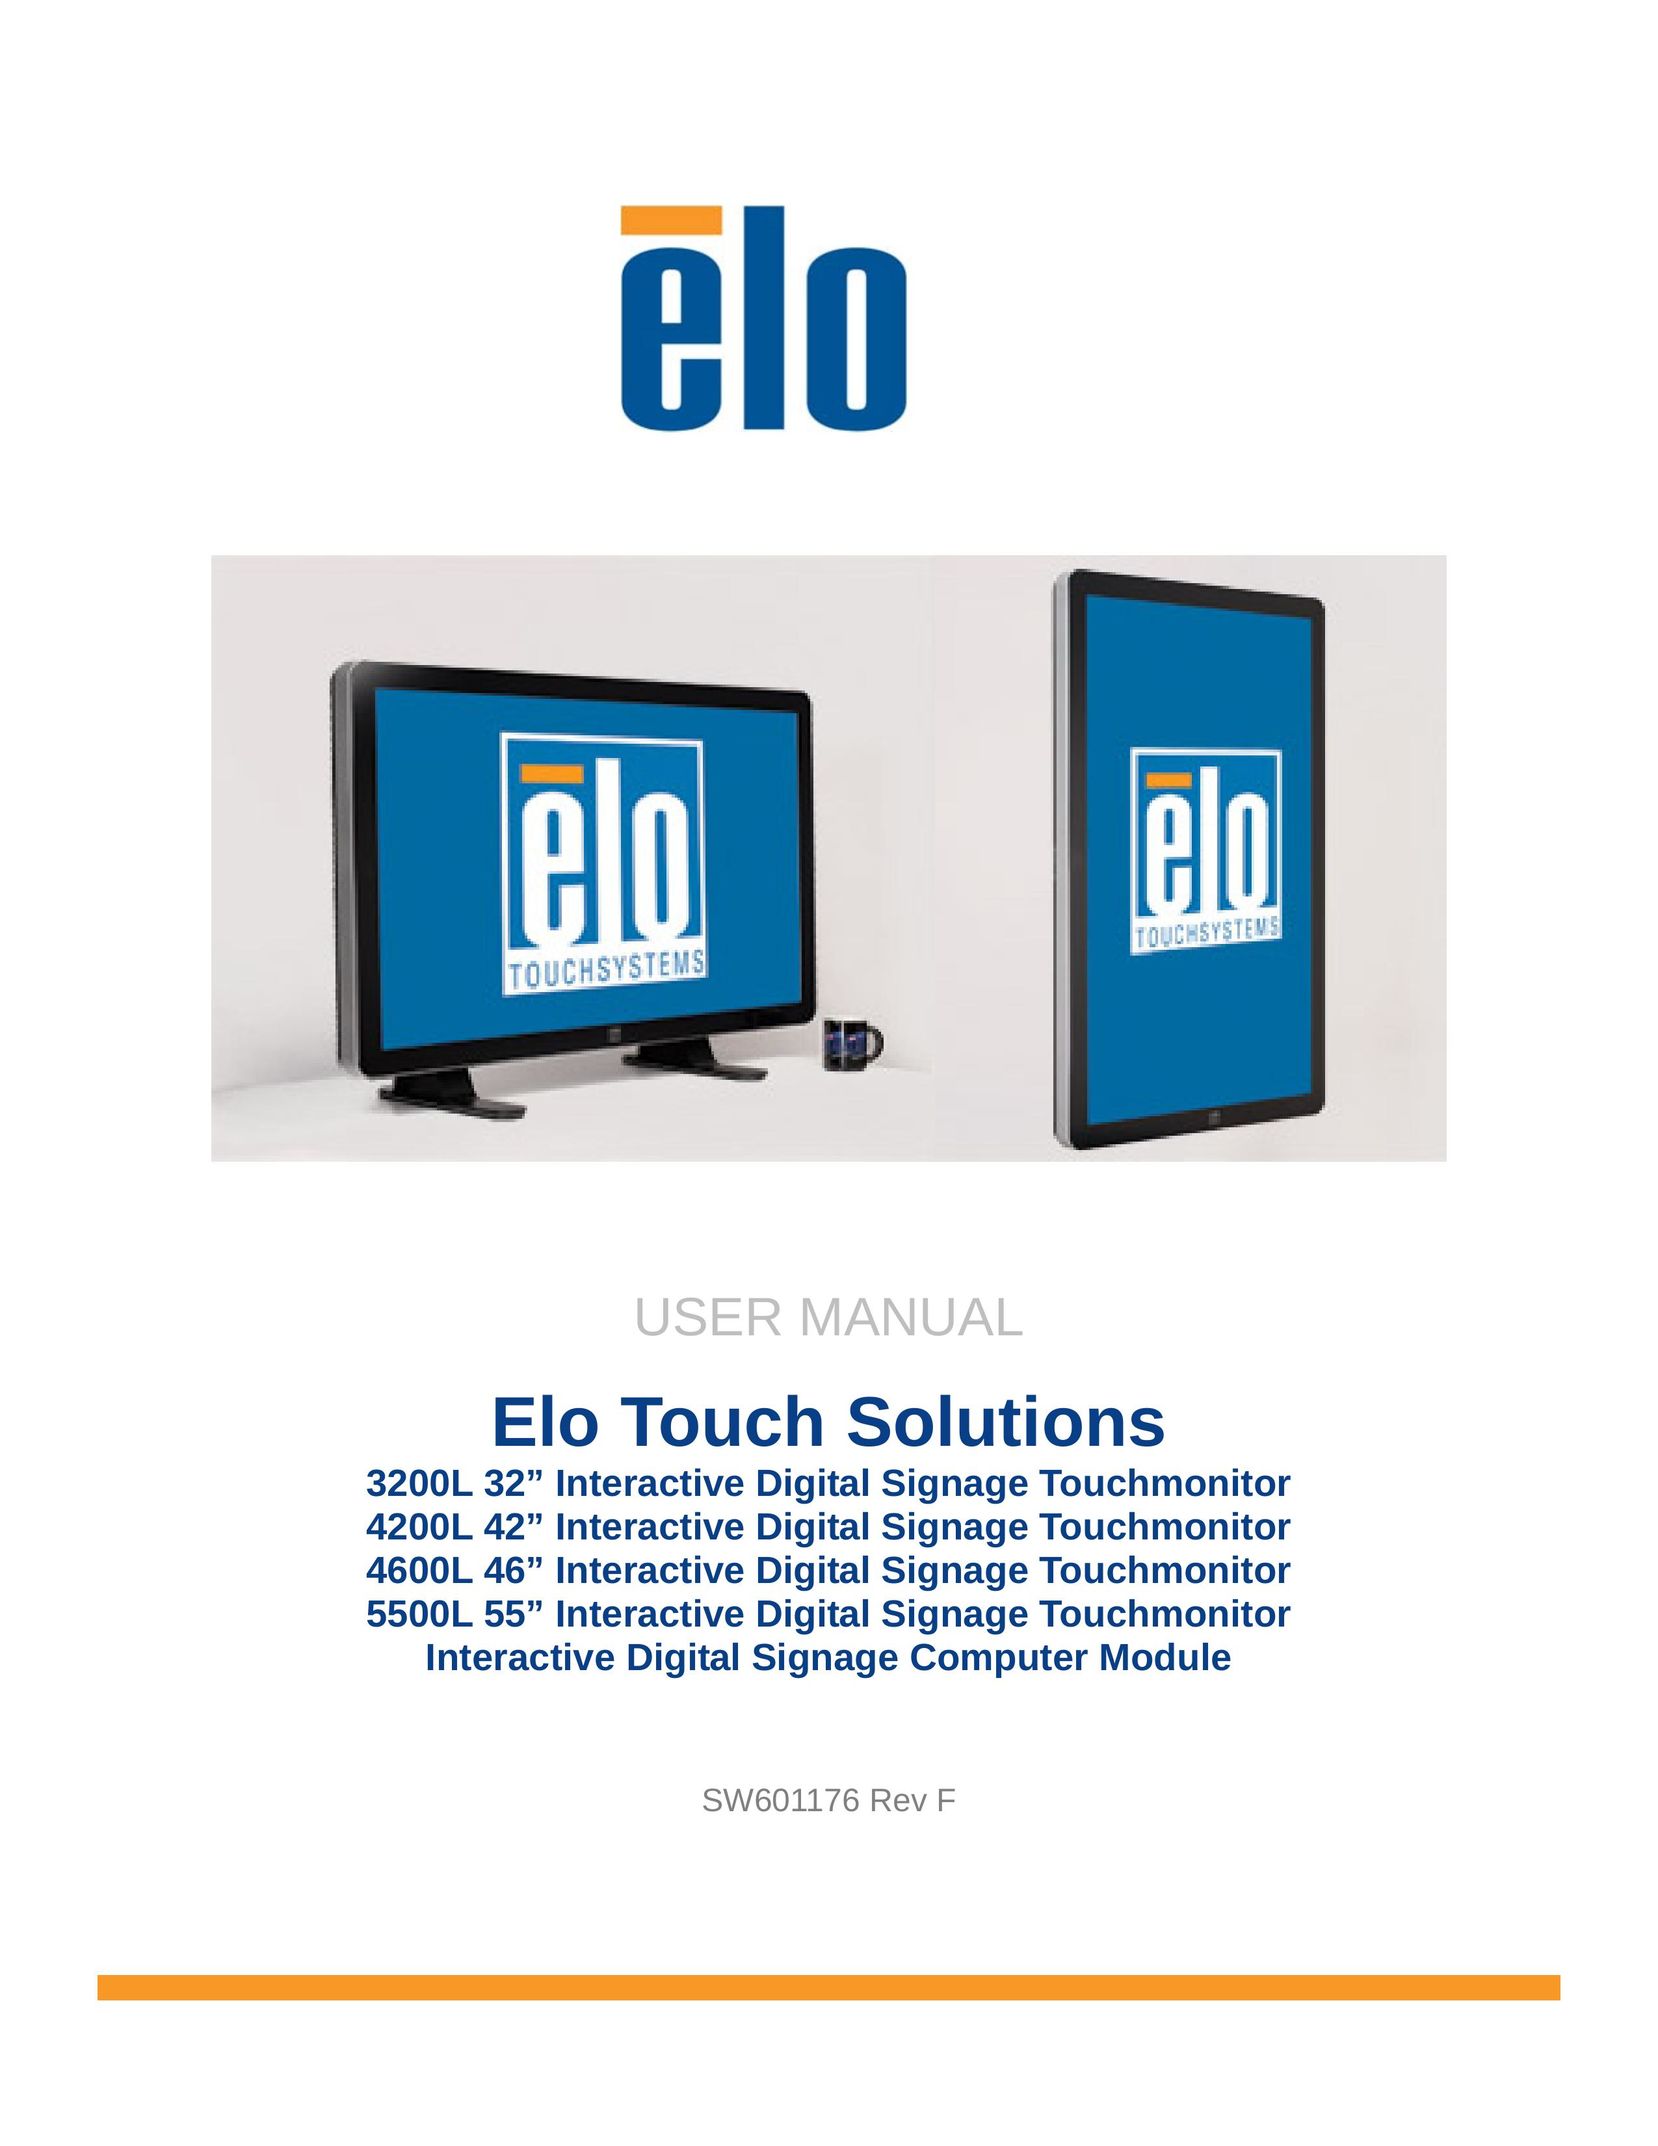 Elo TouchSystems 4200L Car Video System User Manual